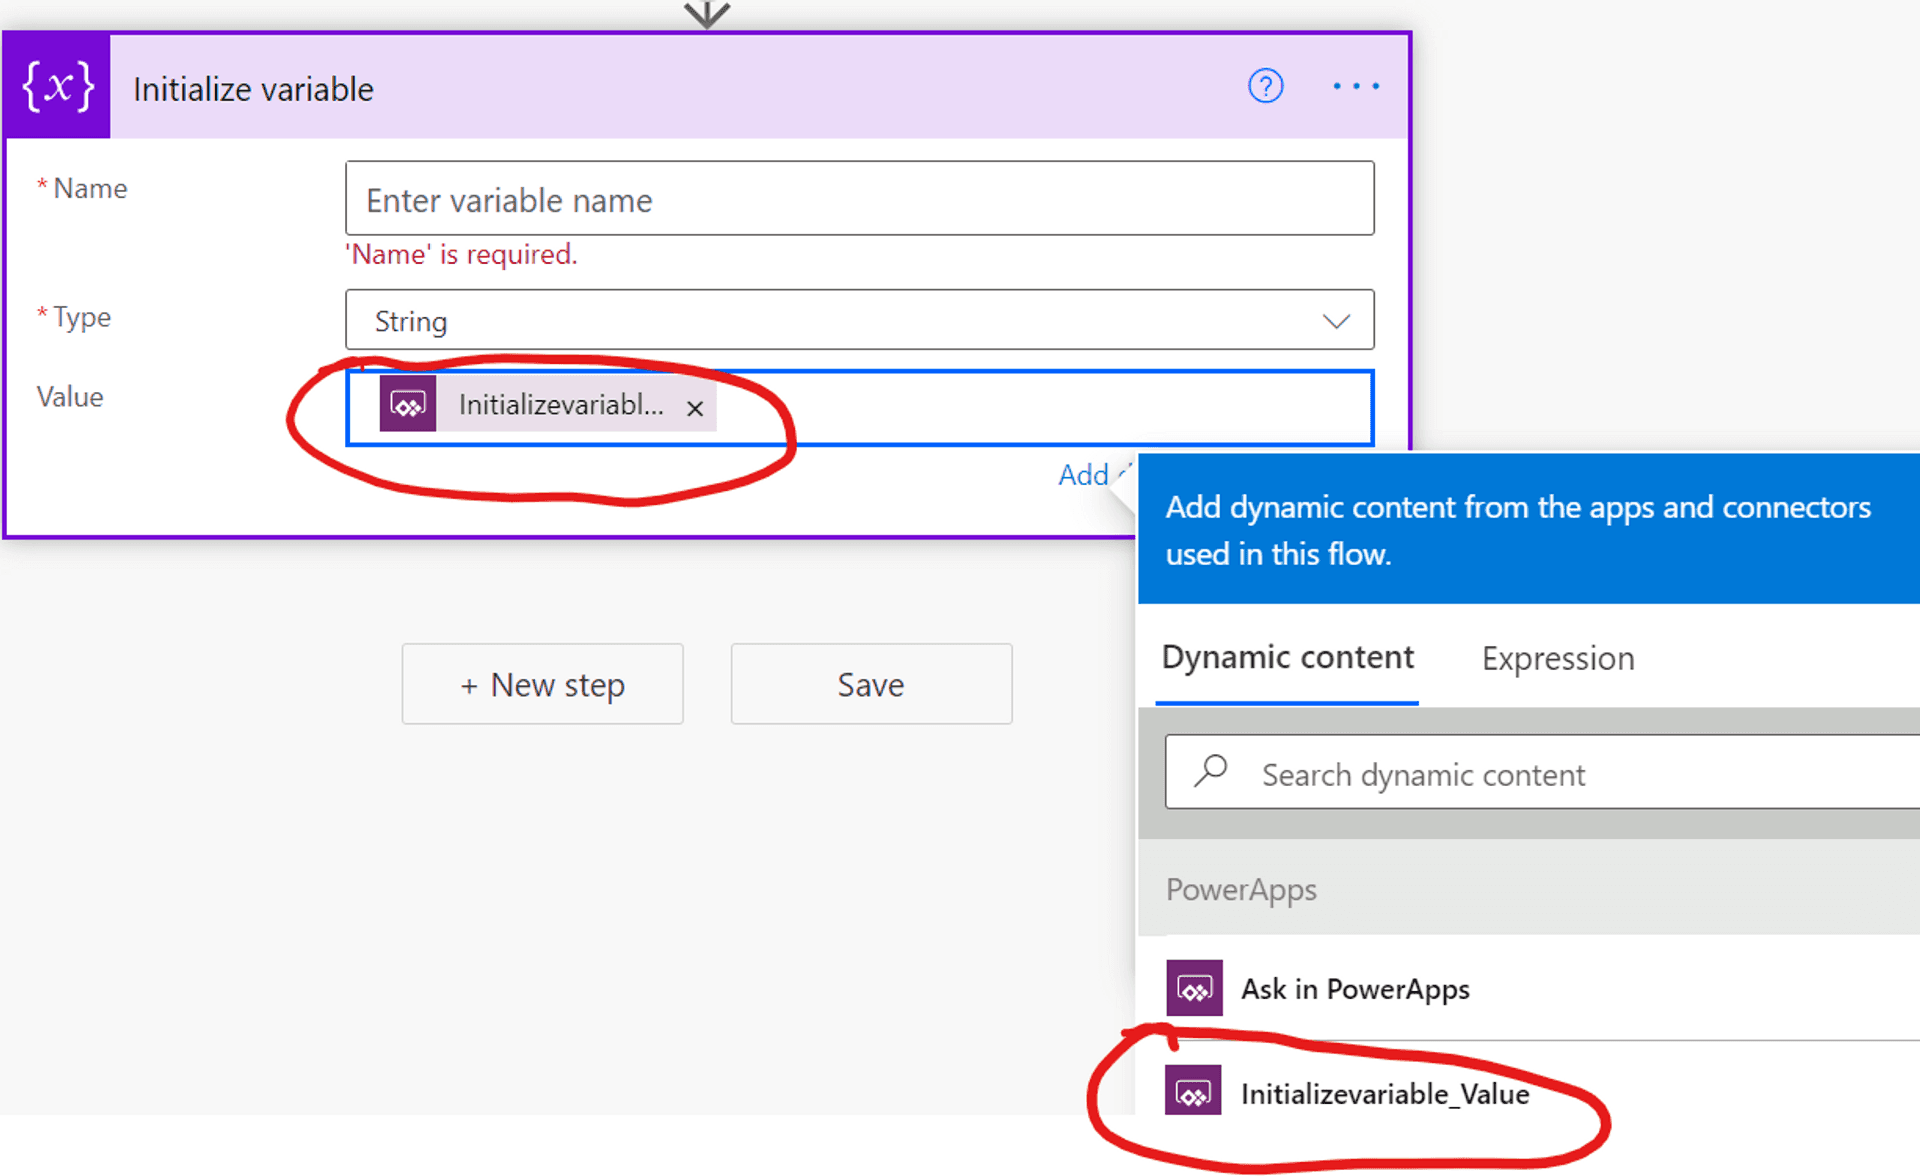 Clicking on Ask in PowerApps without renaming